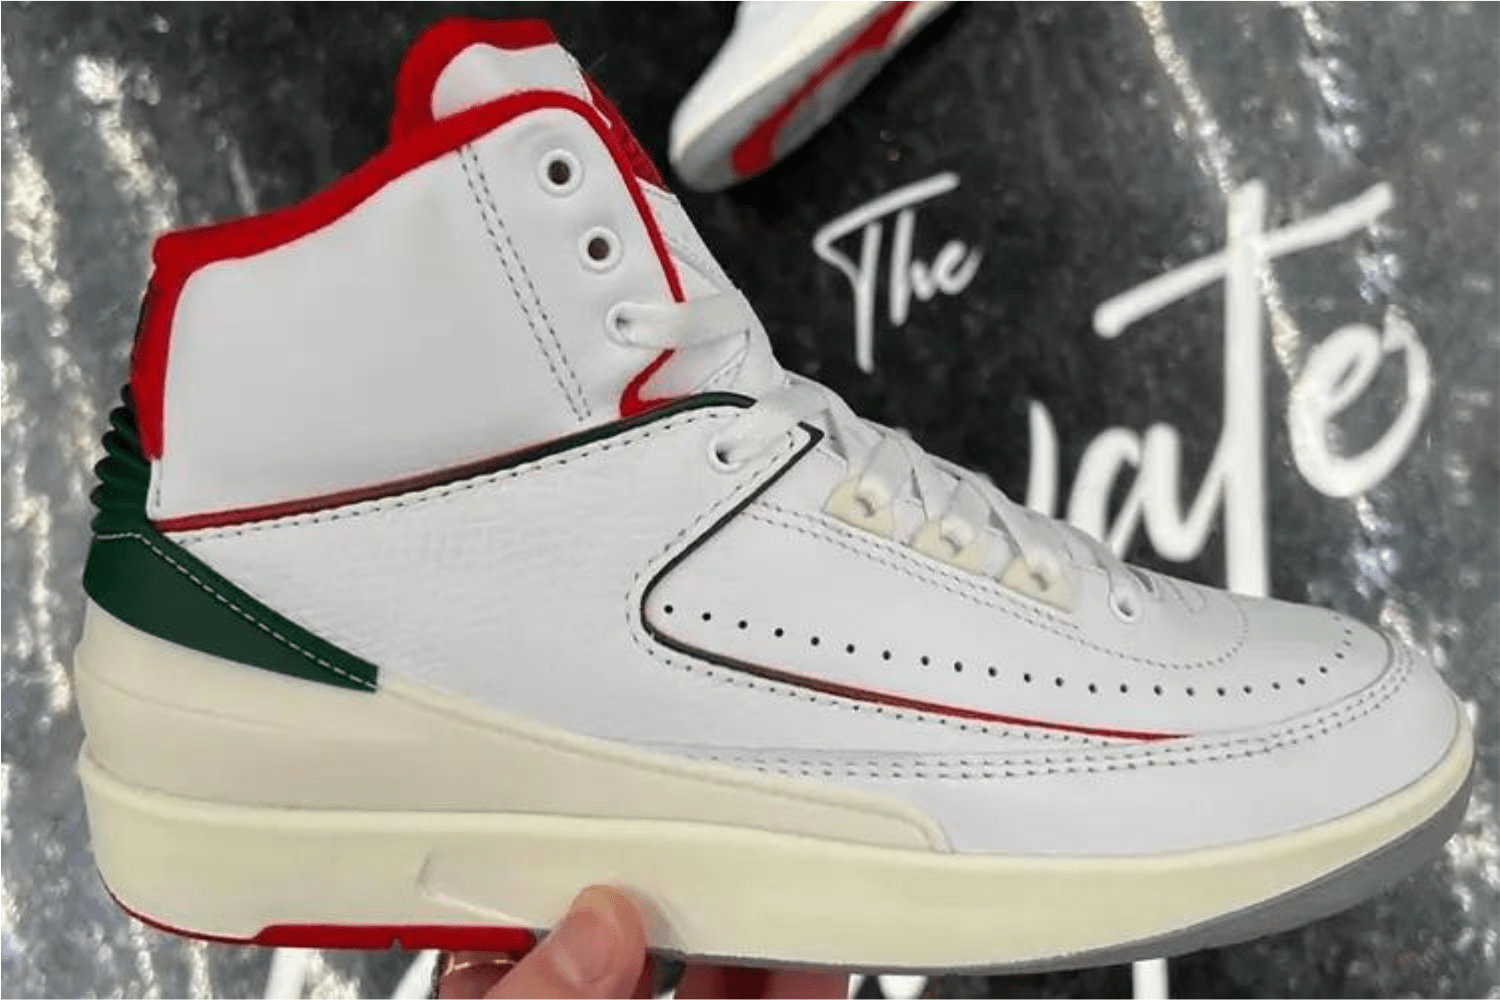 Jordan 2 'Fire Red' Flavored colorway gets first look